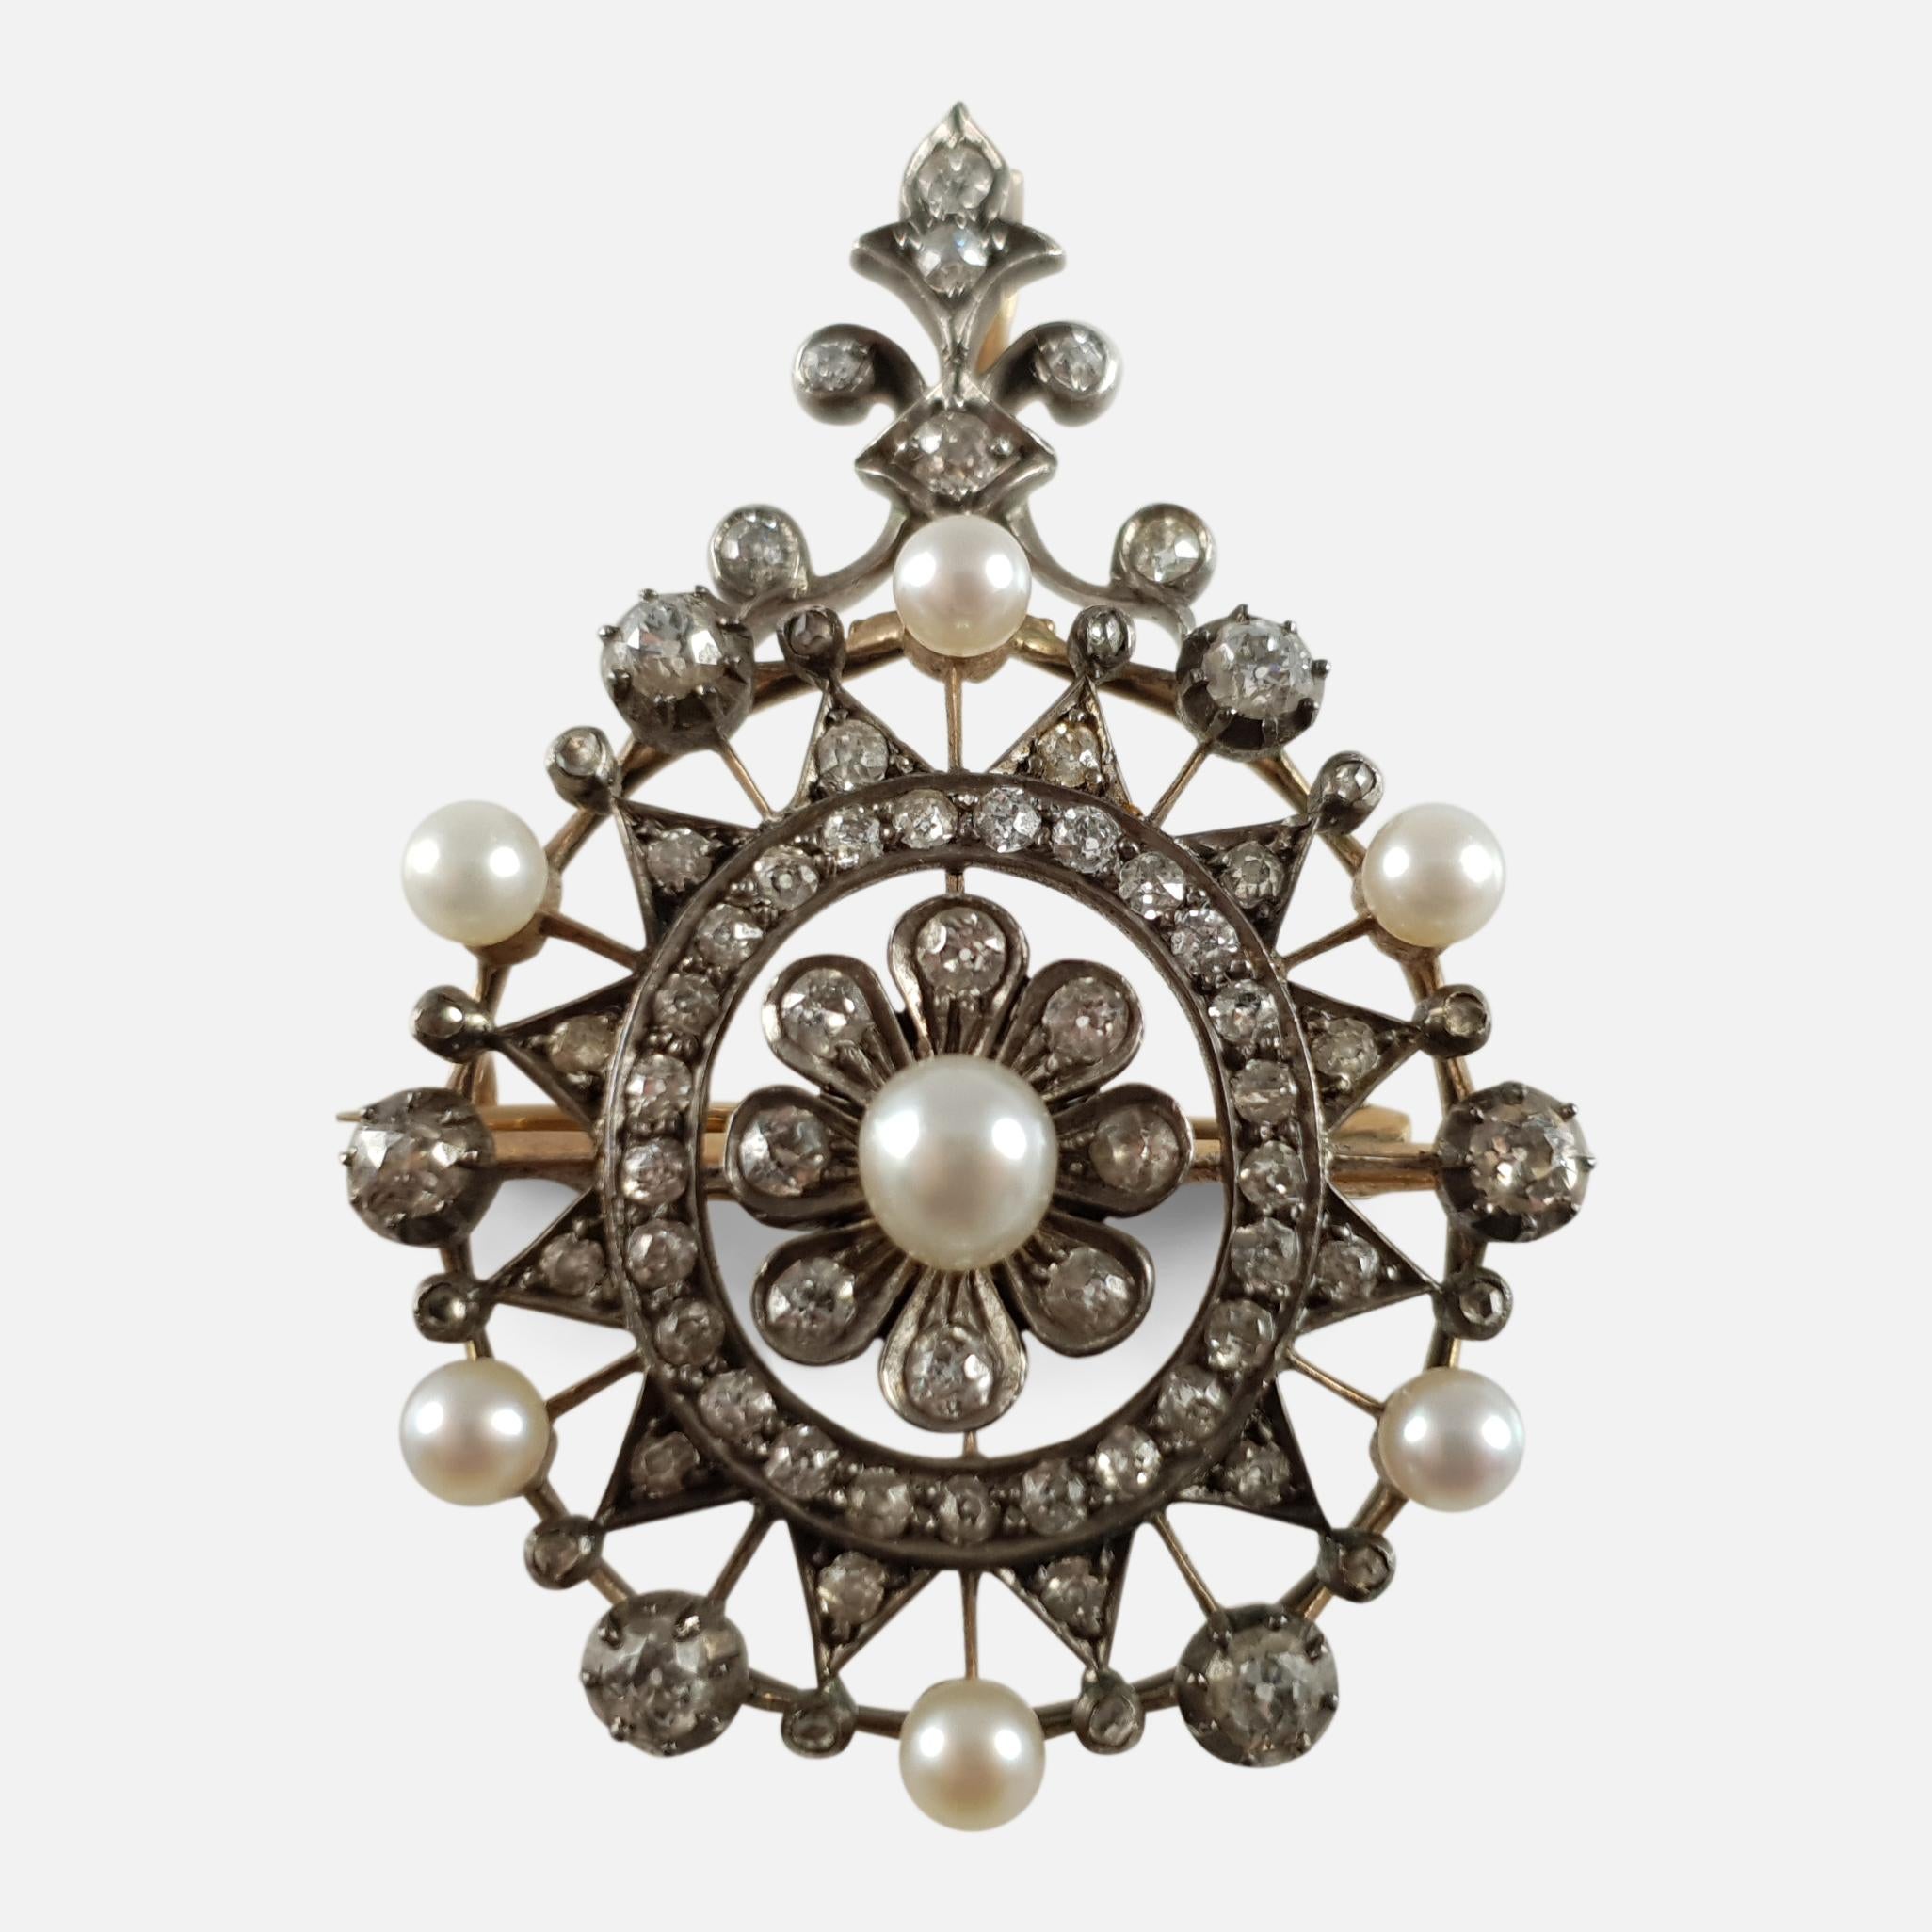 Description: - This is a stunning antique Victorian period 15 karat gold, silver fronted, 2.12 cts diamond, and pearl pendant brooch - circa 1880. The pendant brooch is set with a 5mm pearl to the centre of a daisy flower head, and each petal grain